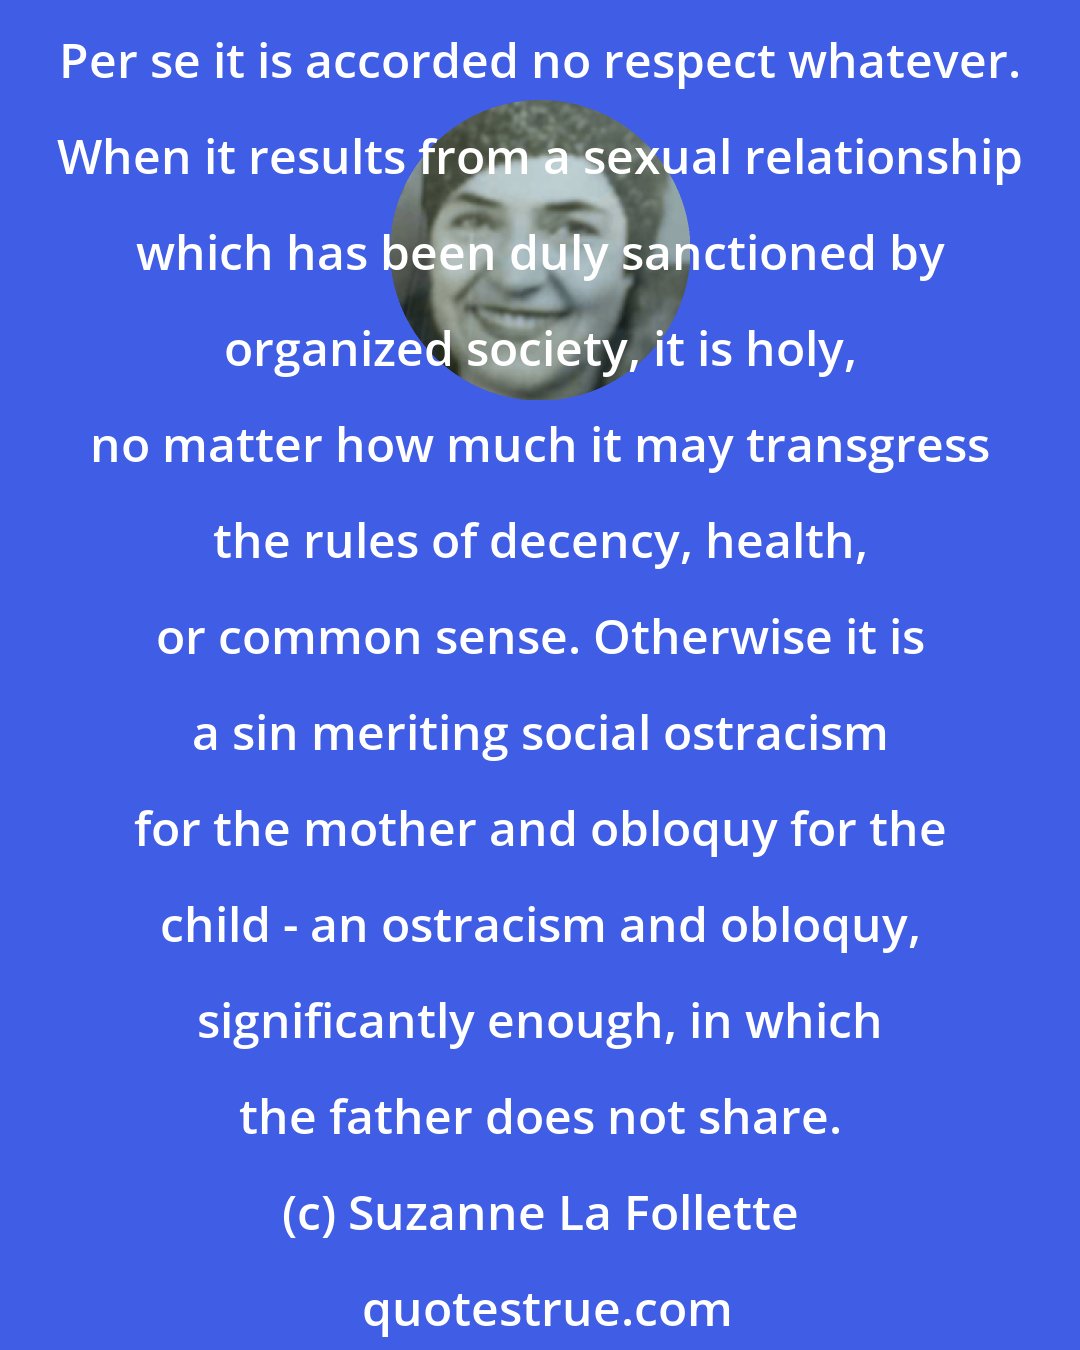 Suzanne La Follette: Motherhood, to be sure, receives a great deal of sentimental adulation, but only if it is committed in accordance with rules which have been prescribed by a predominantly masculine society. Per se it is accorded no respect whatever. When it results from a sexual relationship which has been duly sanctioned by organized society, it is holy, no matter how much it may transgress the rules of decency, health, or common sense. Otherwise it is a sin meriting social ostracism for the mother and obloquy for the child - an ostracism and obloquy, significantly enough, in which the father does not share.